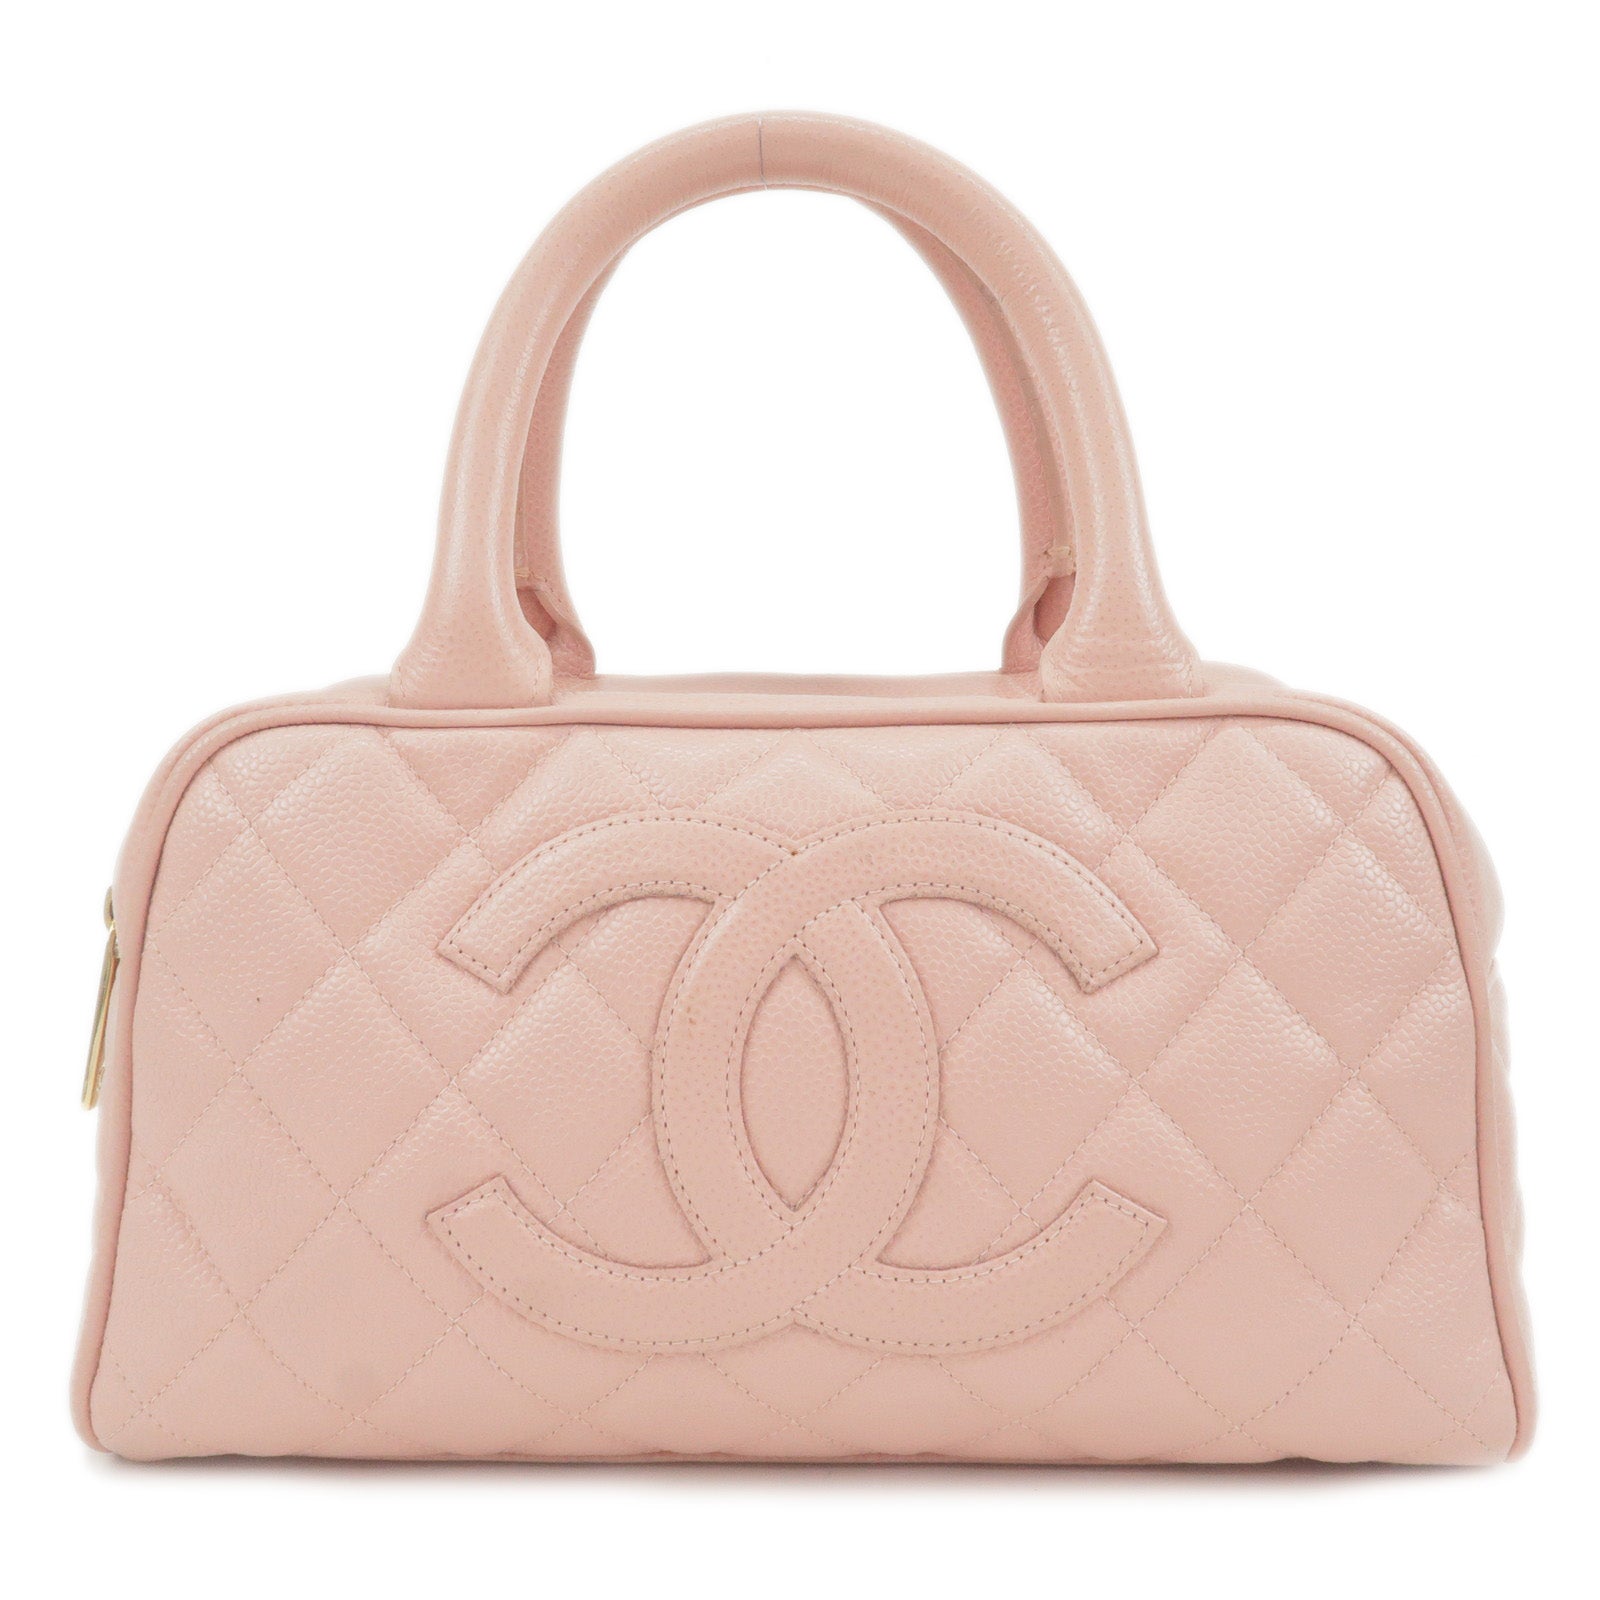 Pre-owned Chanel Coco Handle Leather Handbag In Beige